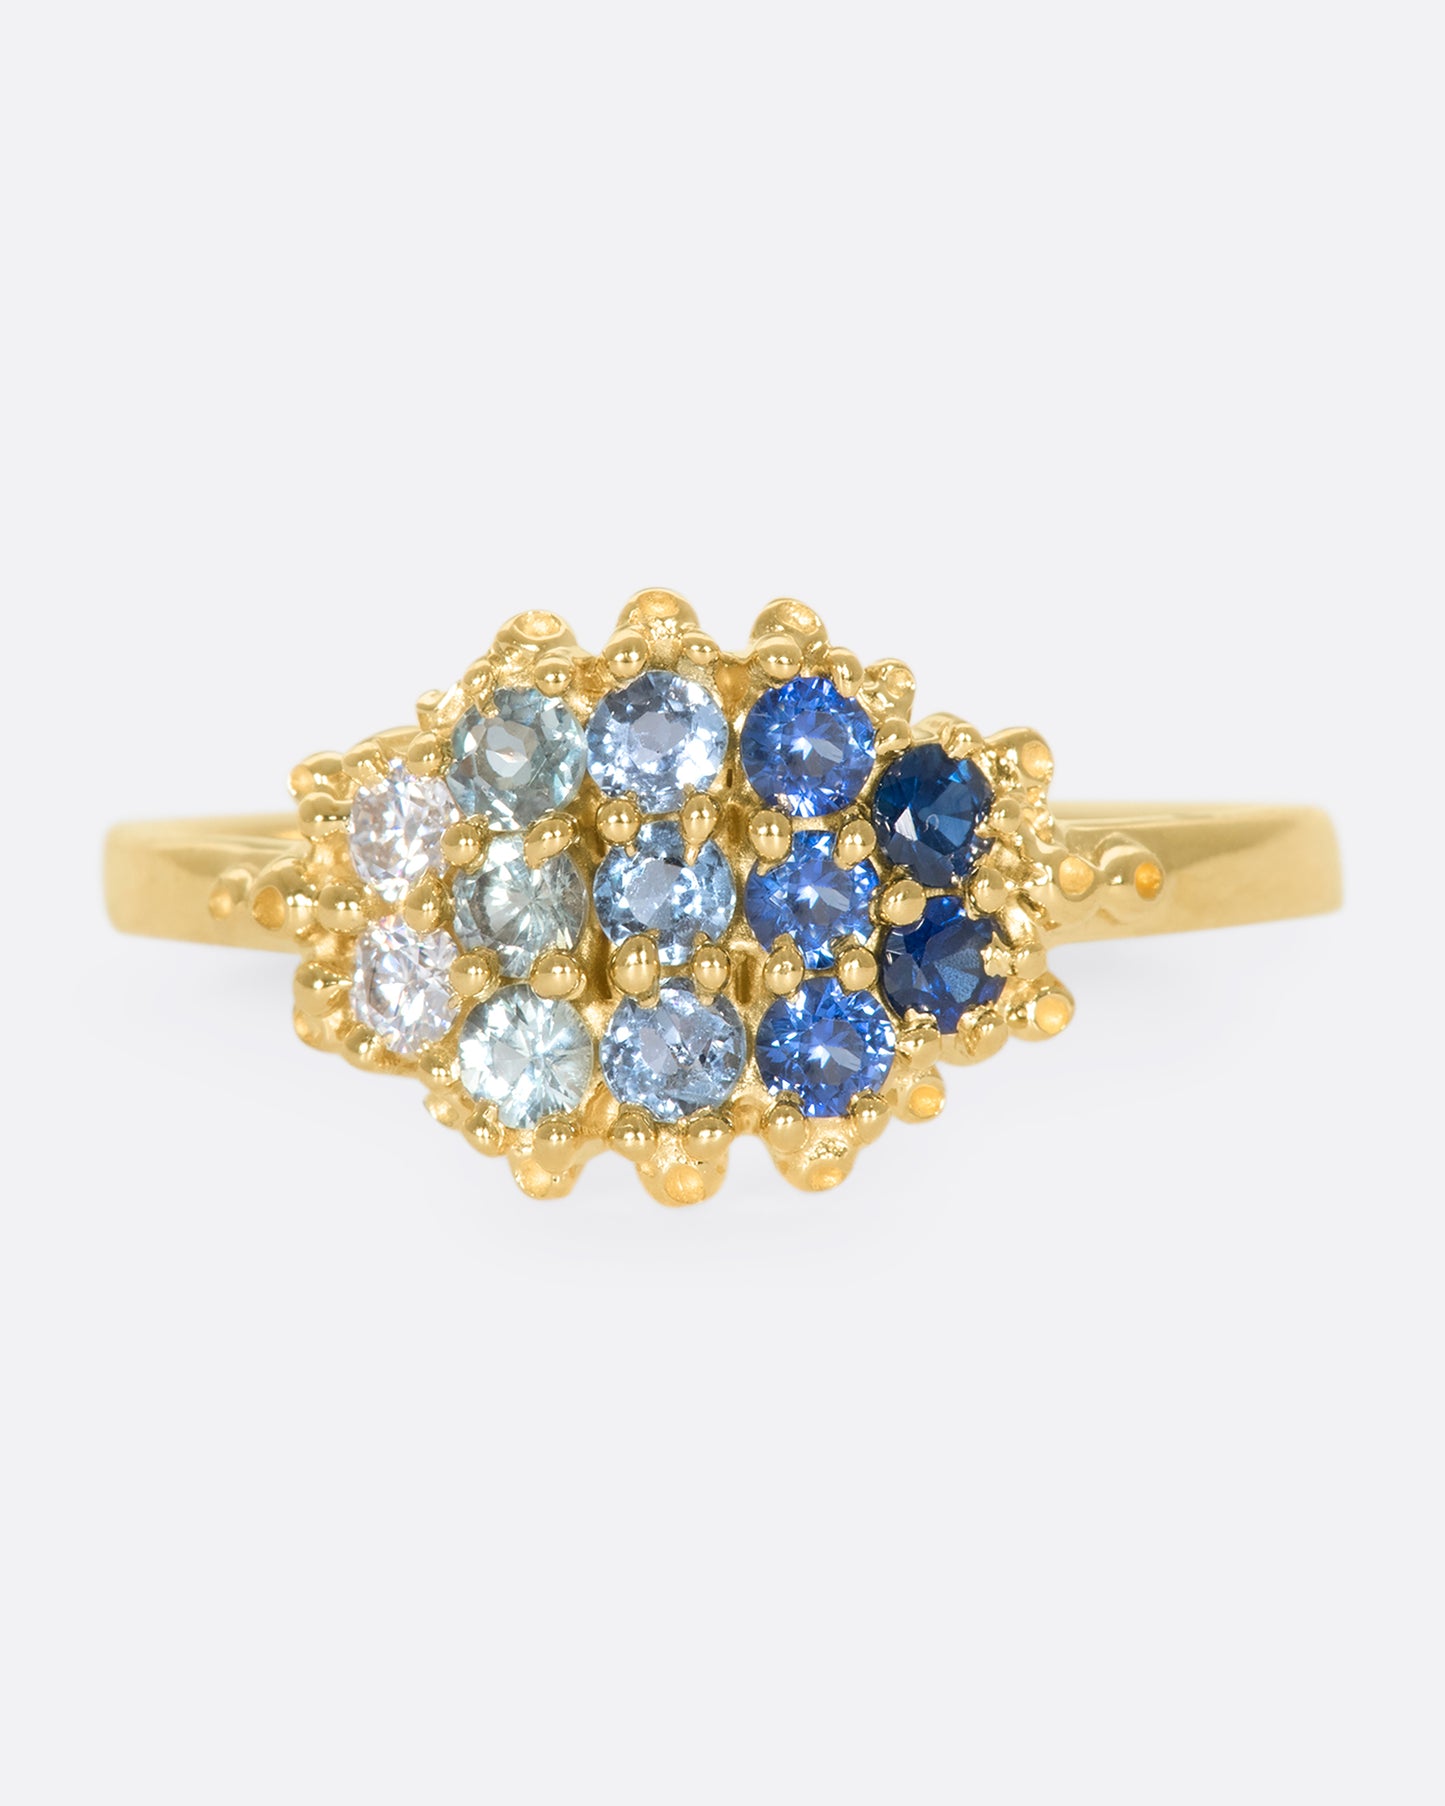 A close up of the face of a yellow gold ring with 12 sapphires in a range of blue shades.